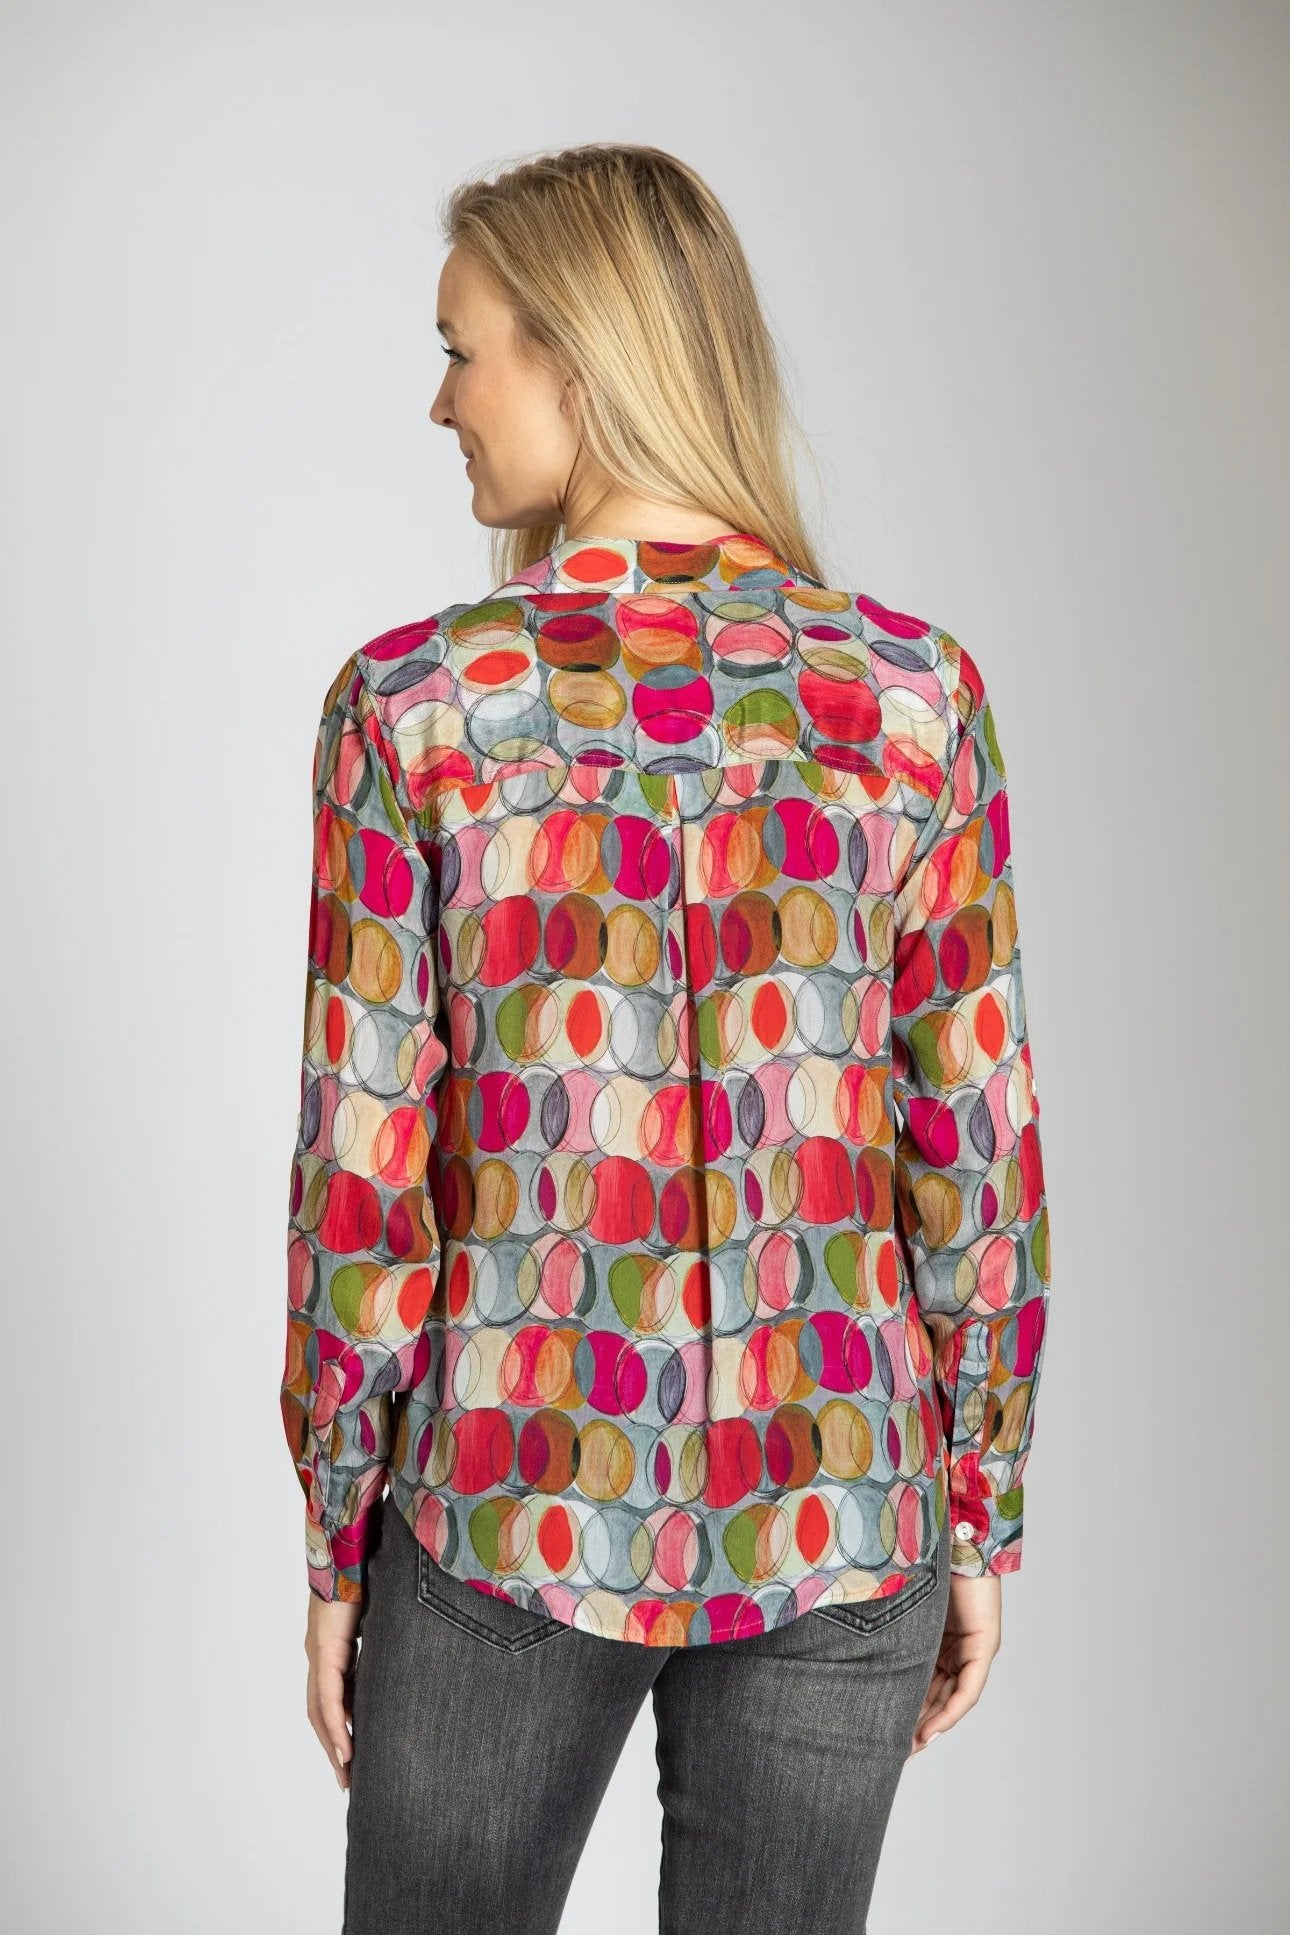 Overlapping Red Circles Print Top Back.